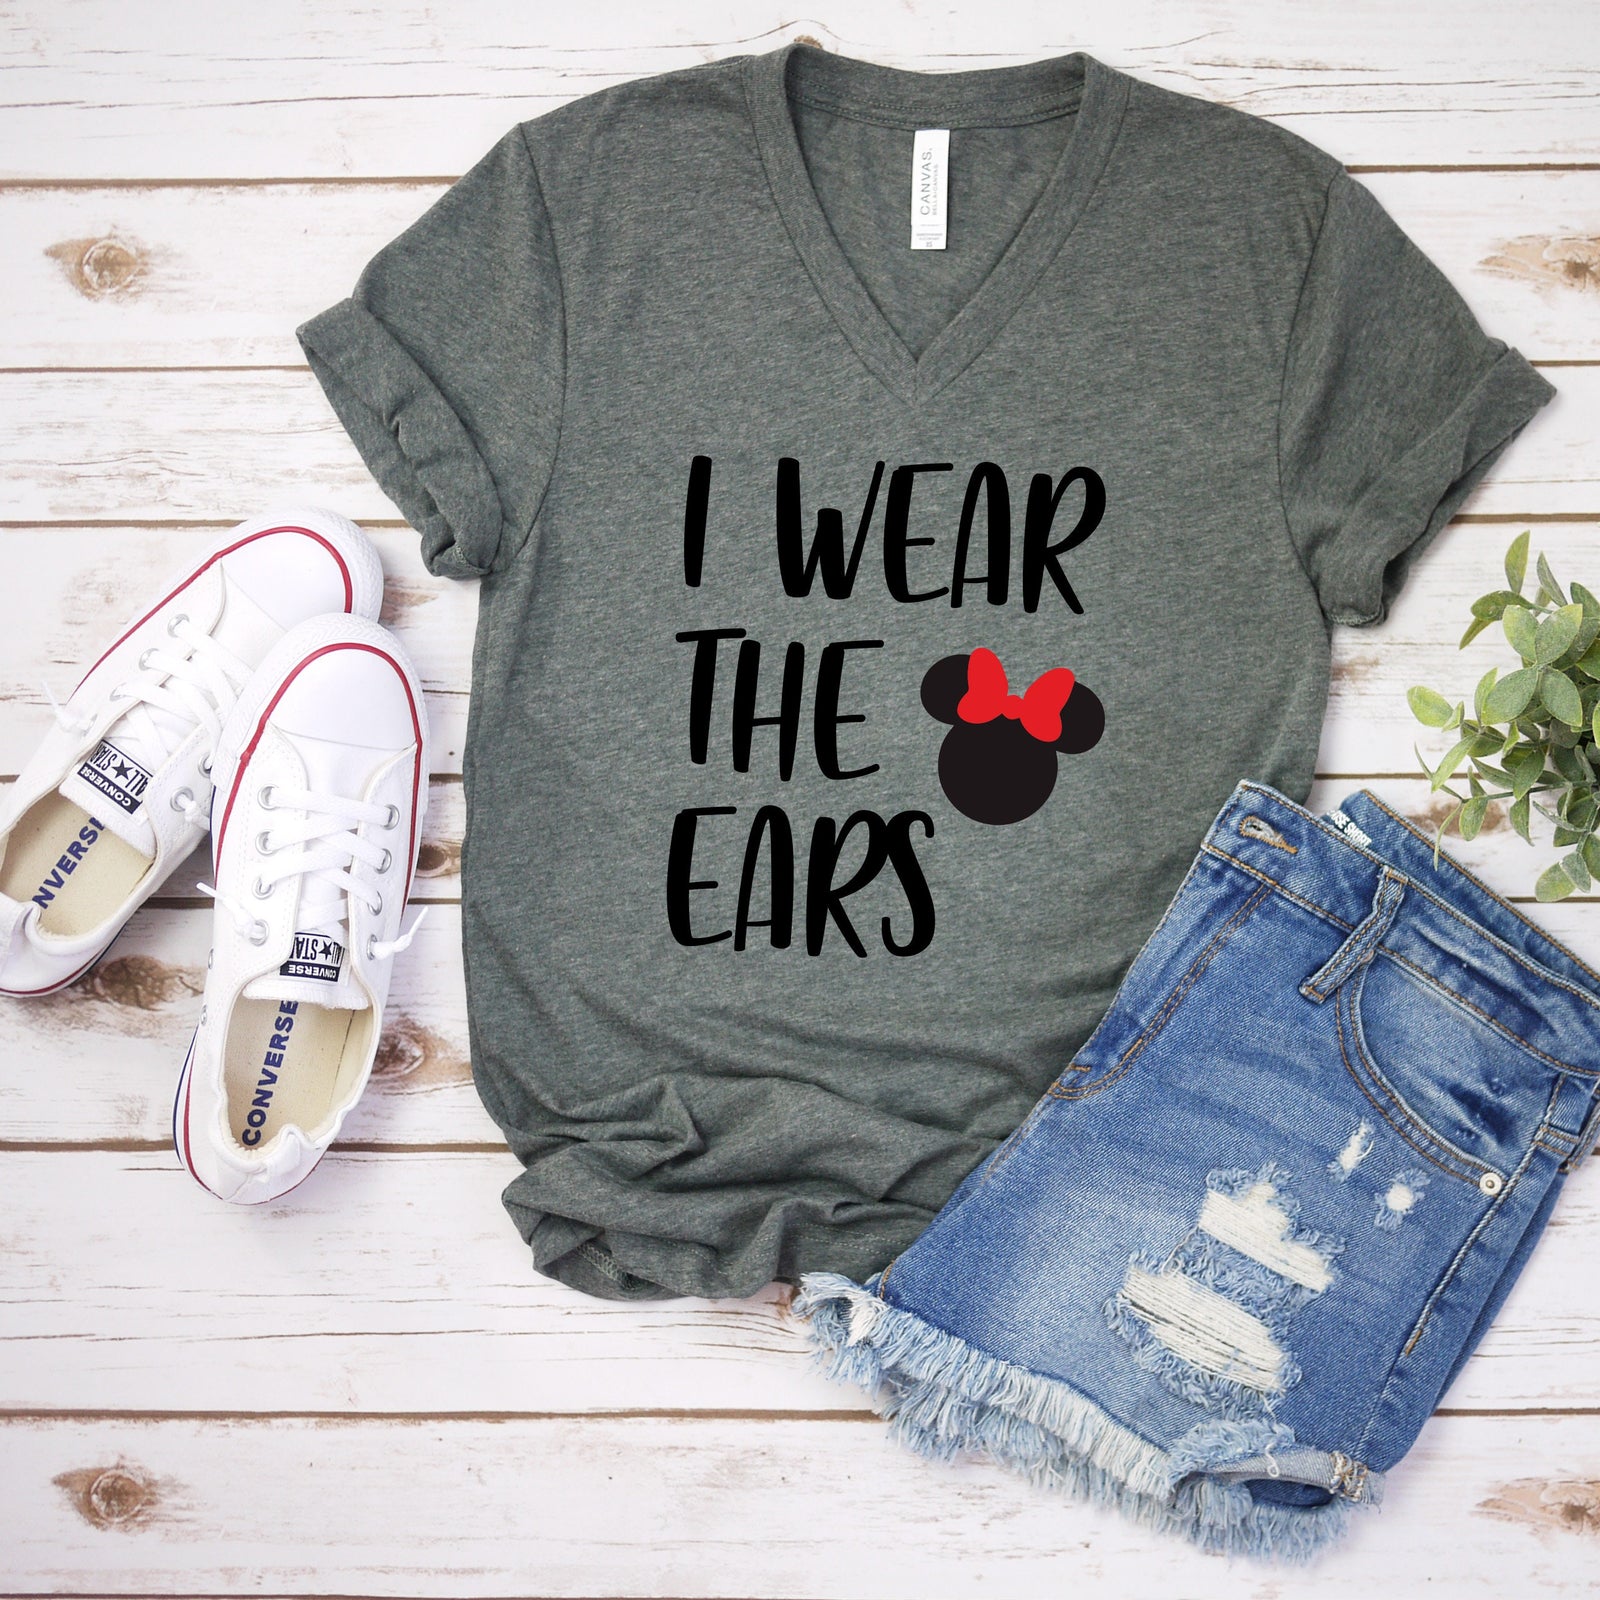 I Wear the Ears Minnie Mouse Adult T Shirt- Disney Trip Matching Shirts - I Buy the Beers